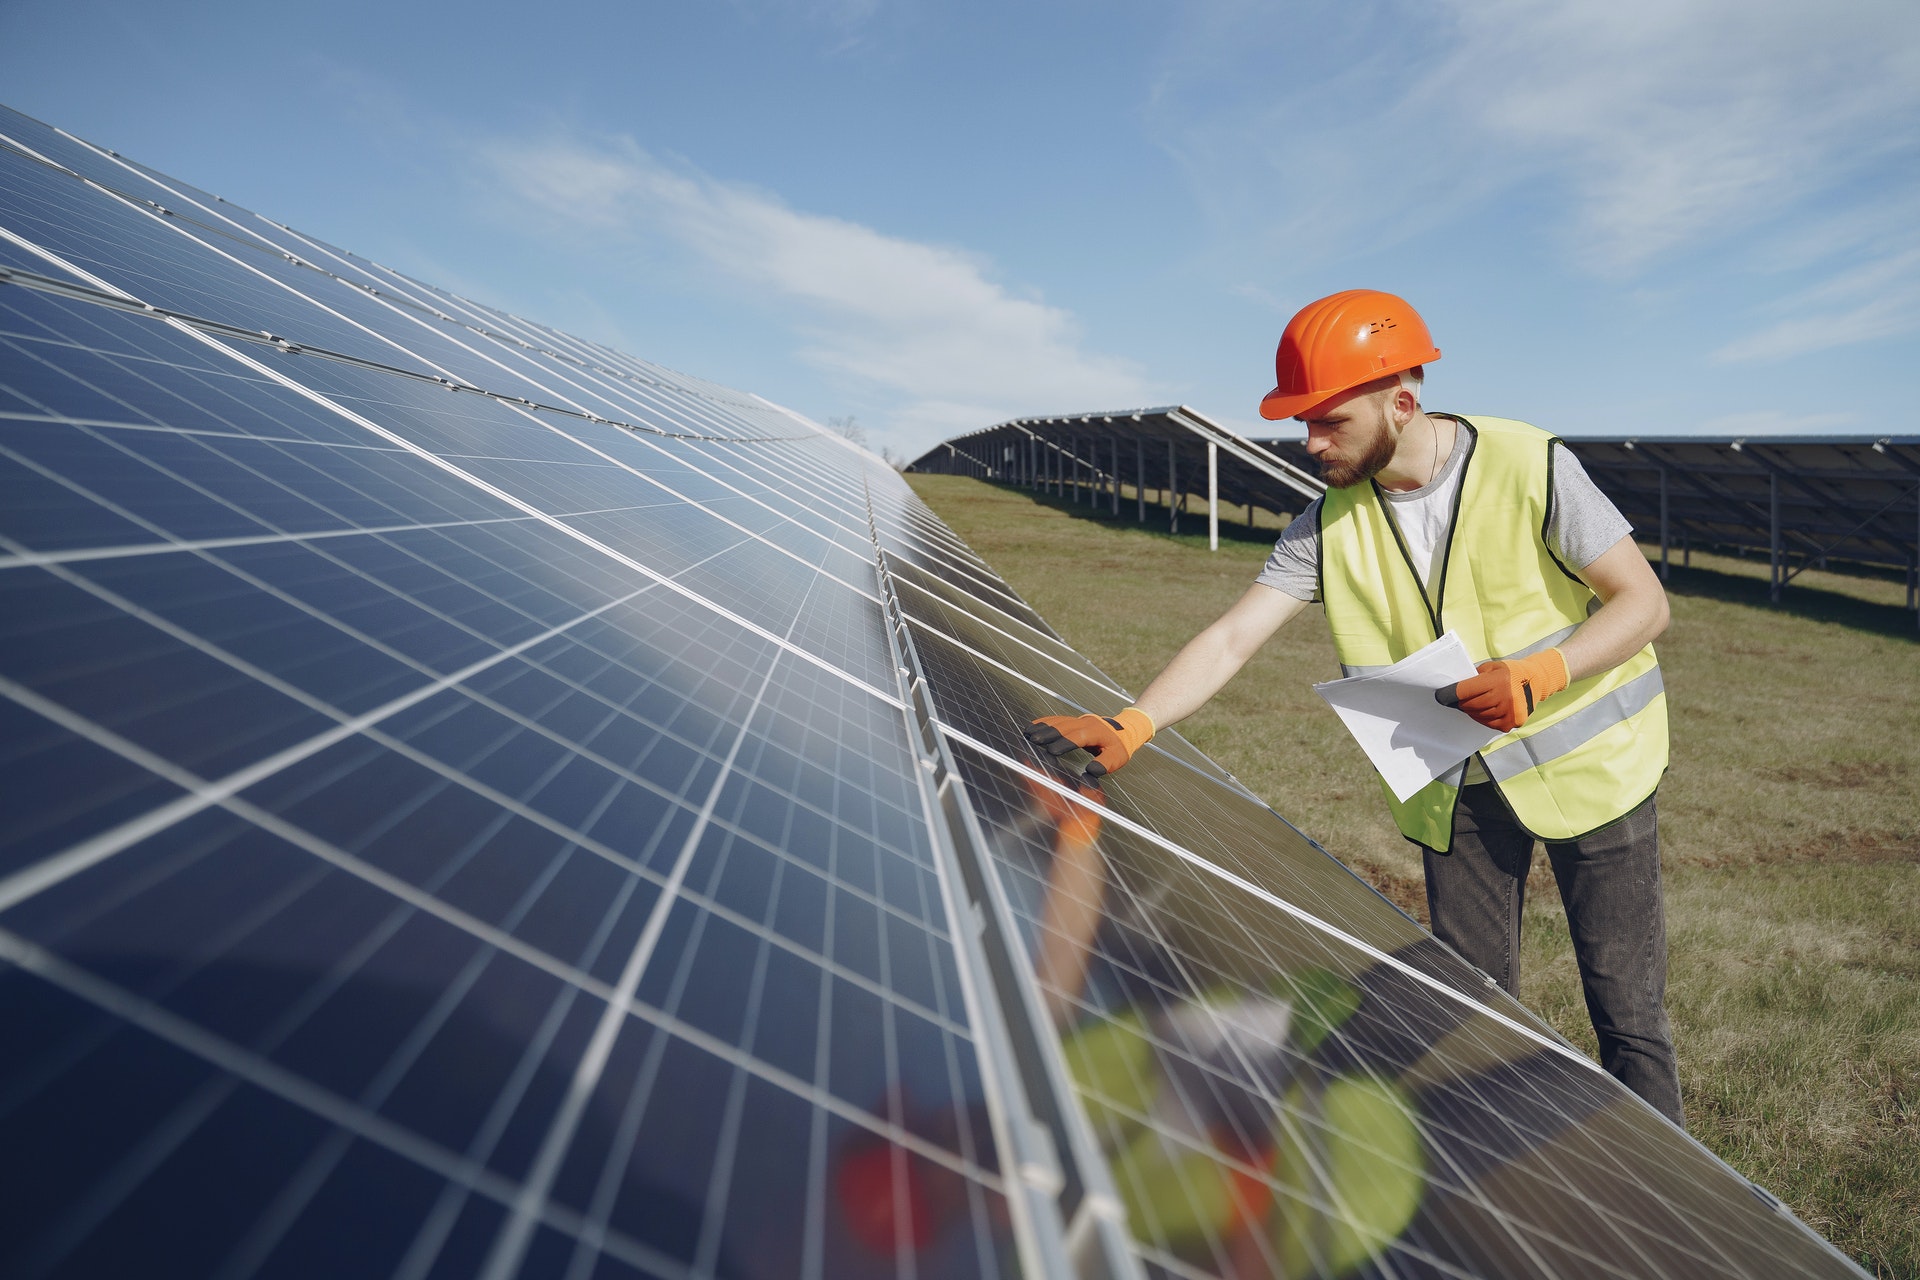 Solar panels in a field getting checked by a construction worker